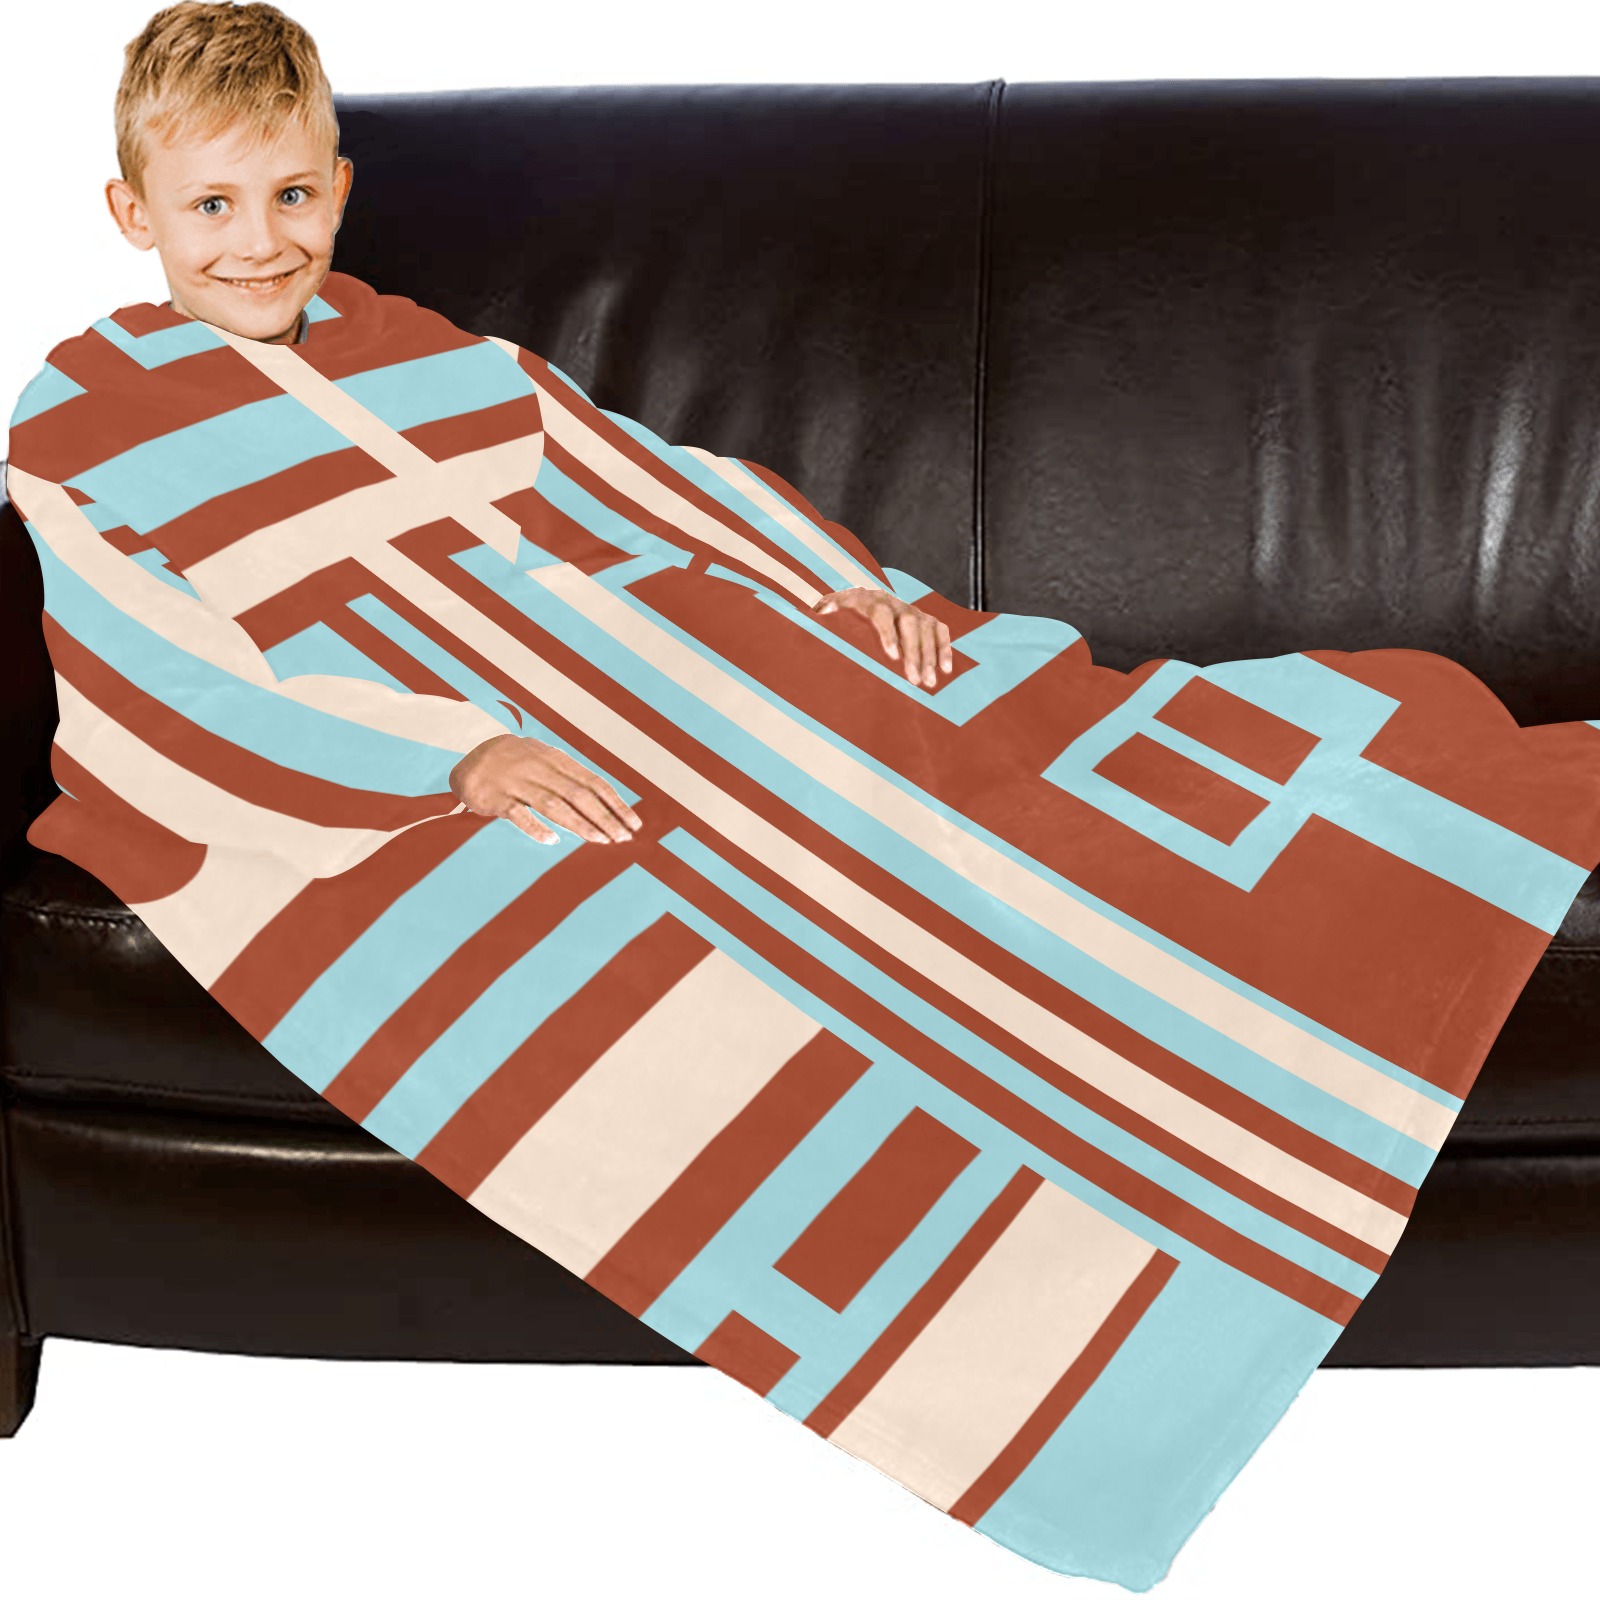 Model 1 Blanket Robe with Sleeves for Kids